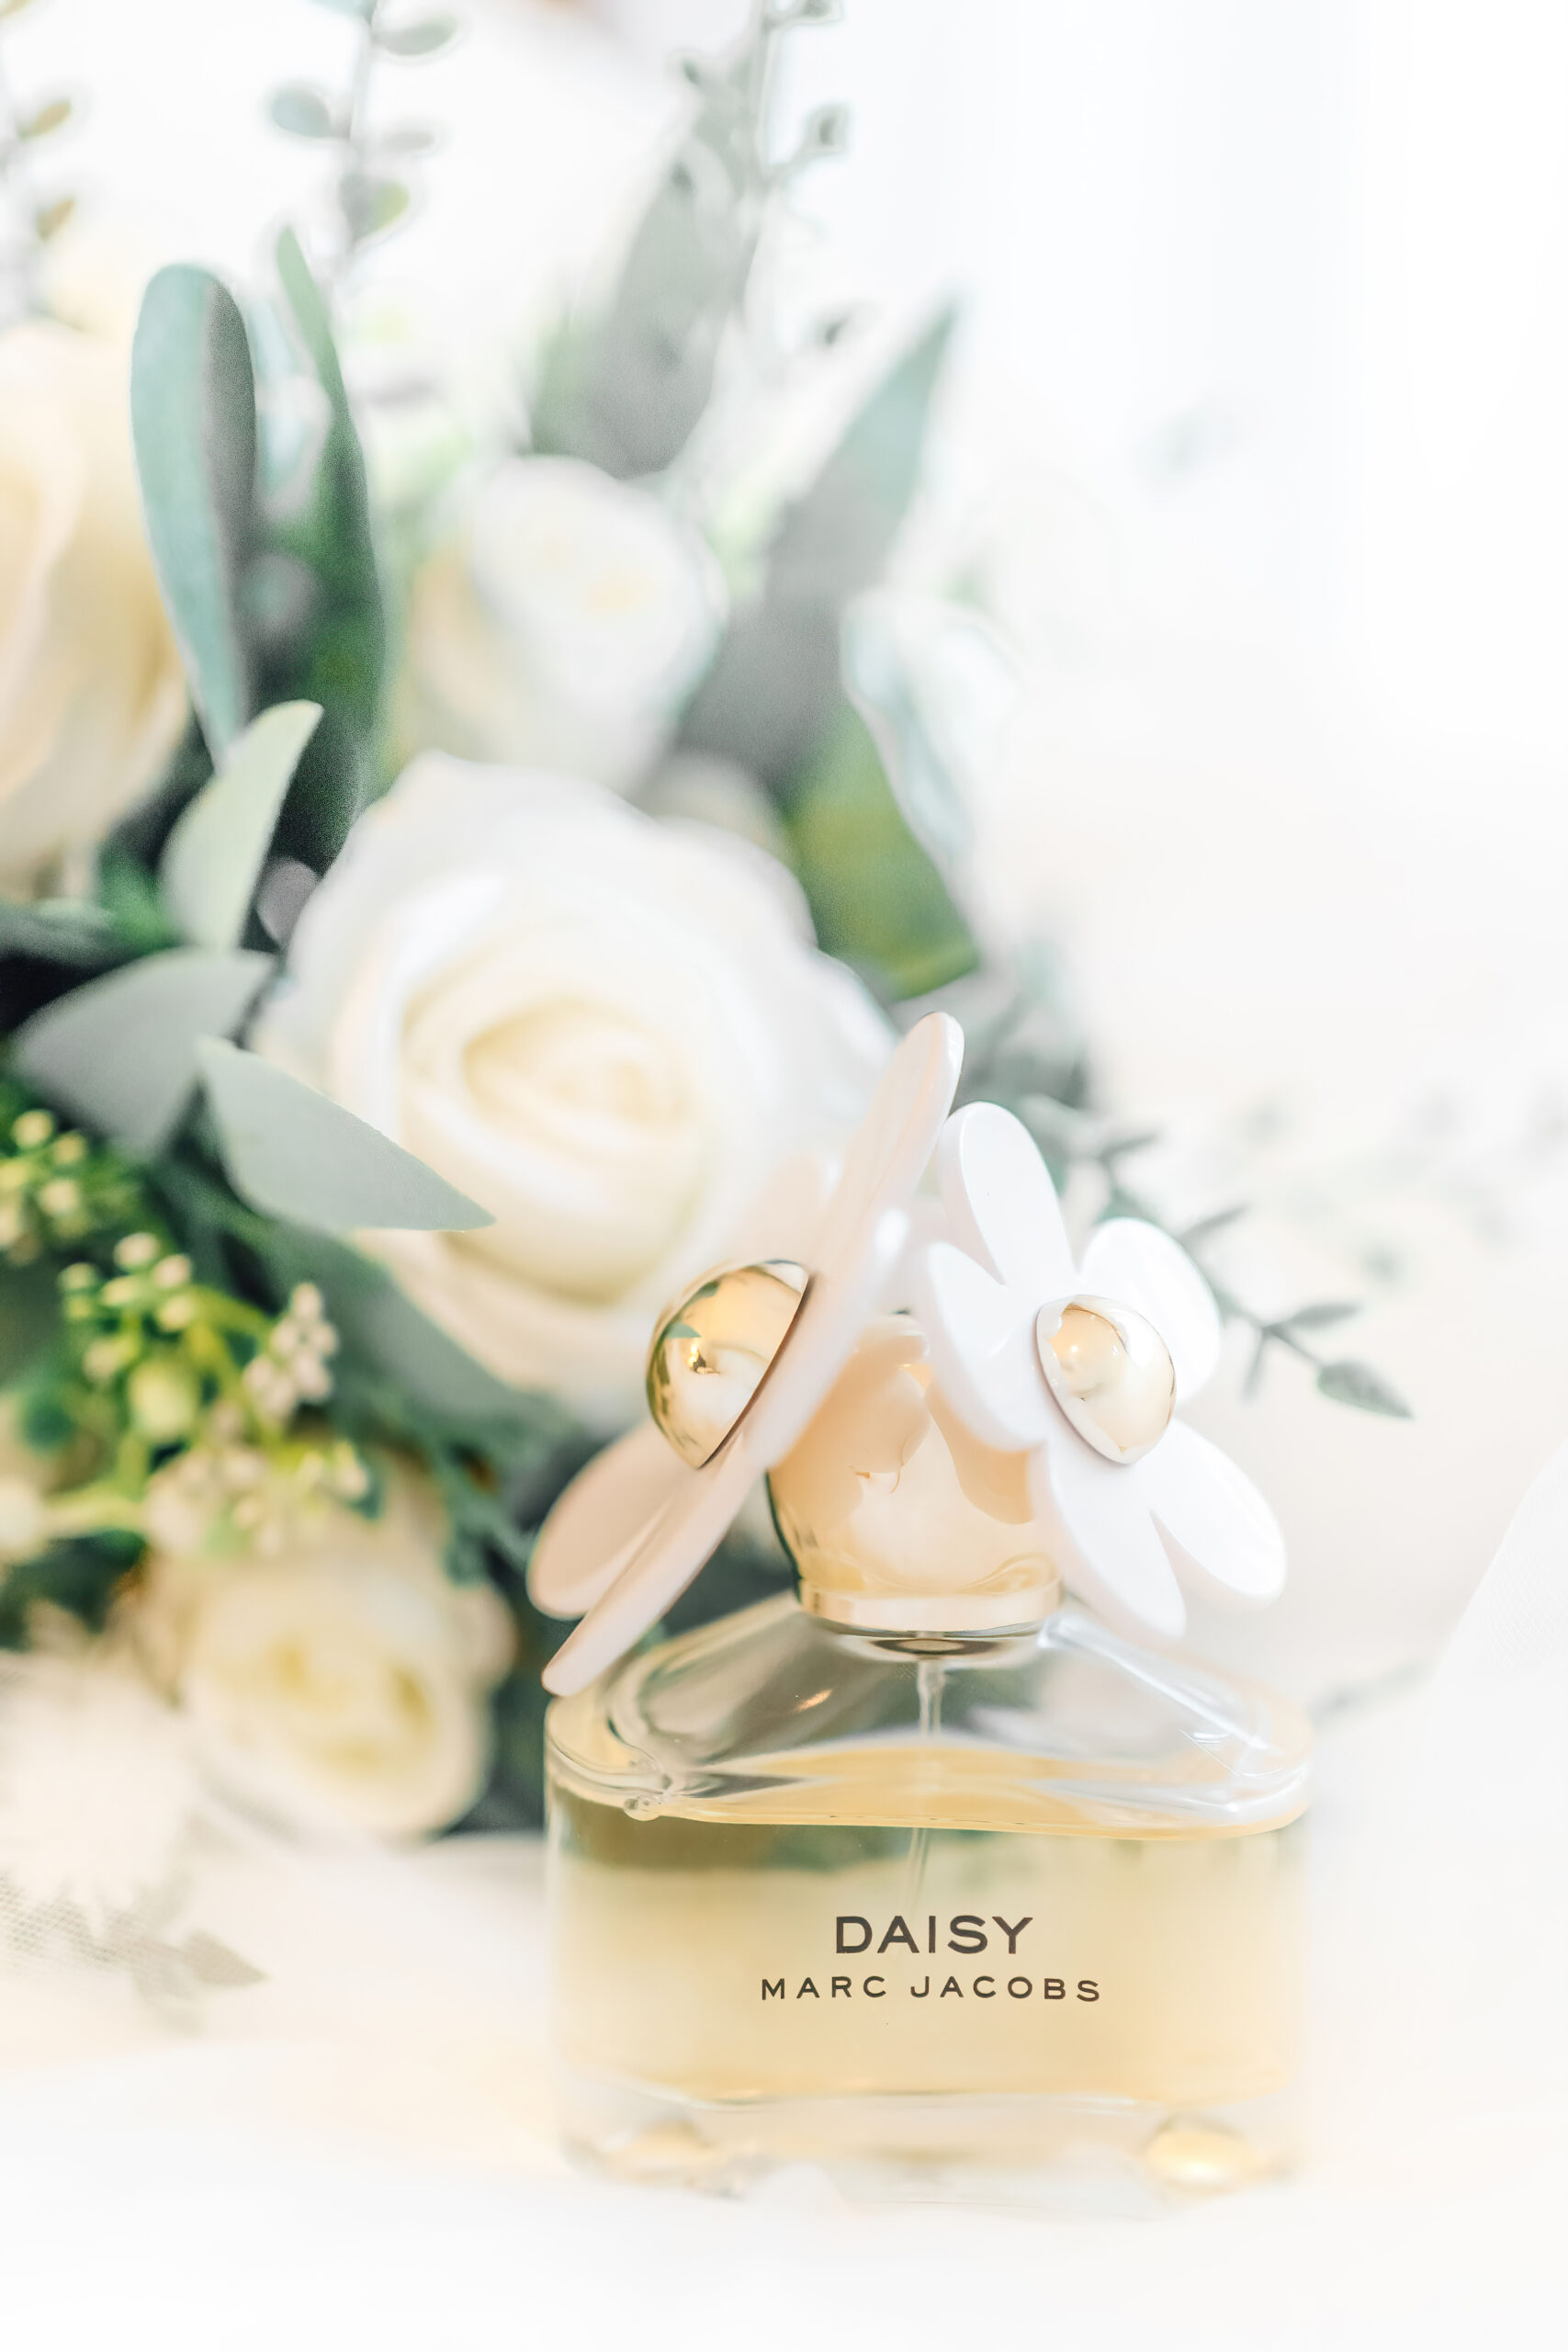 Combermere Abbey bridal prep perfume and flowers